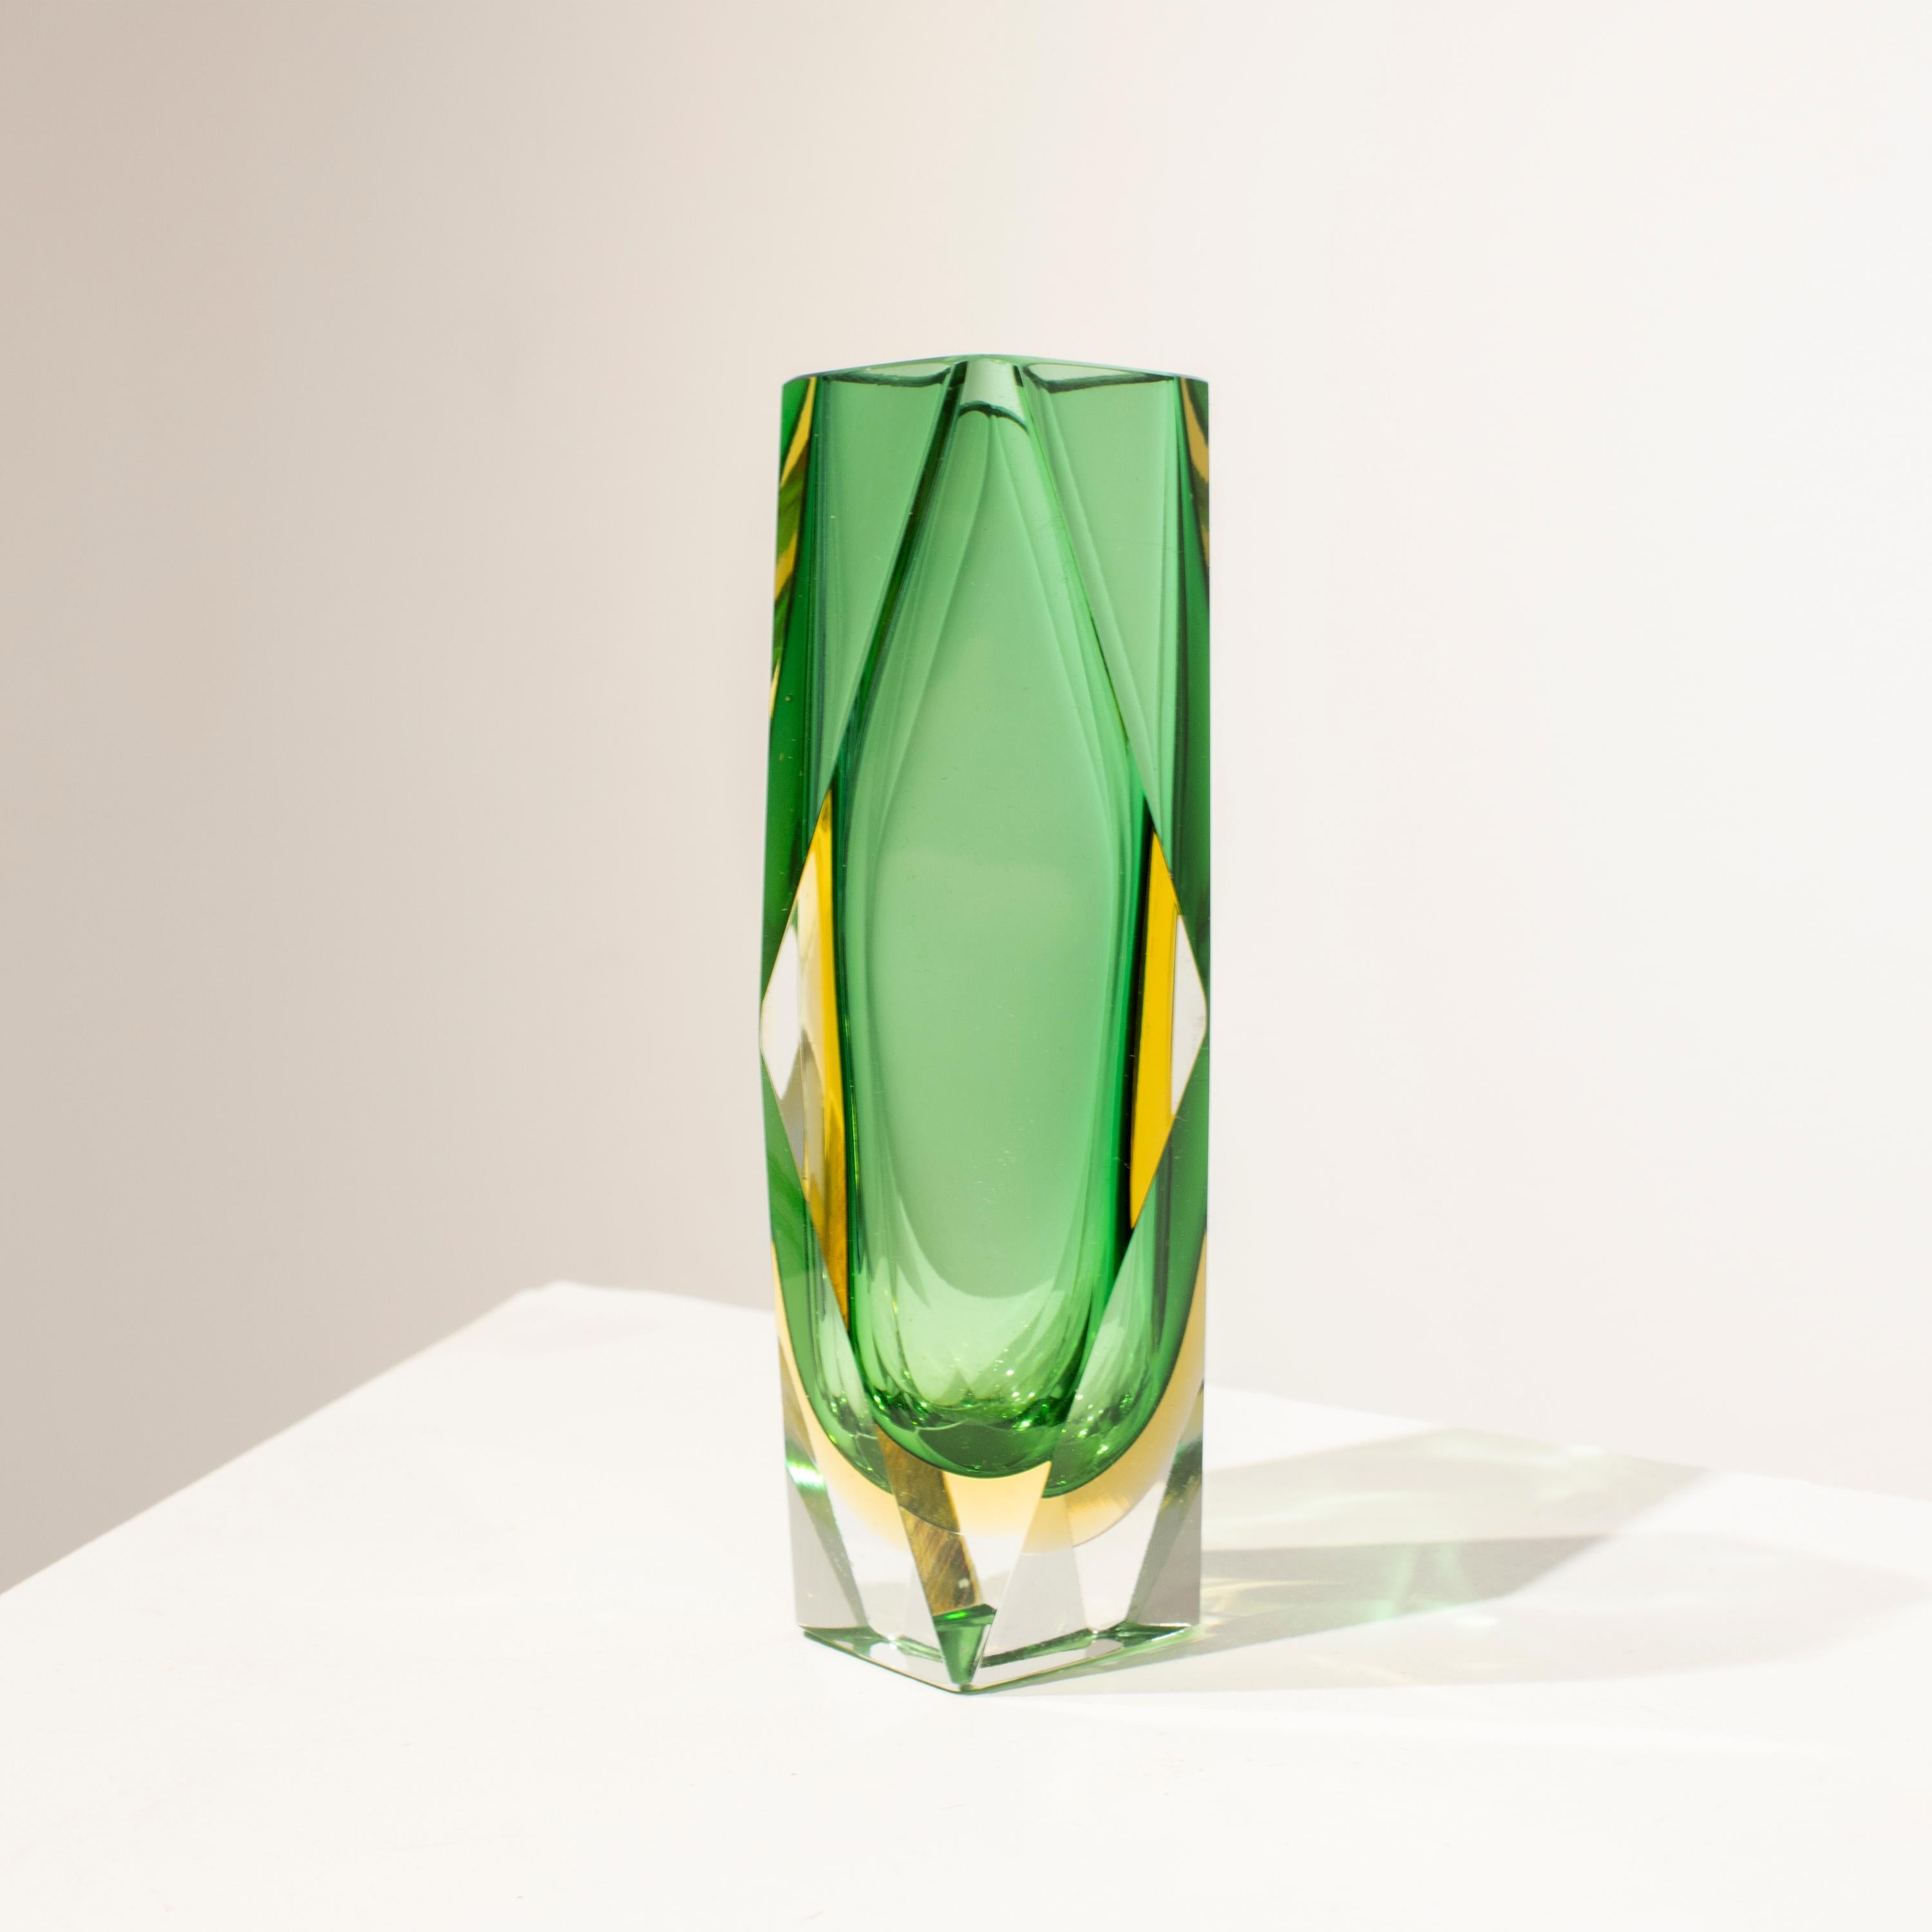 Italian small vase designed by Flavio Poli in the 1970´s. The vase is hand-crafted in faceted Murano glass in different colors with predominant green.